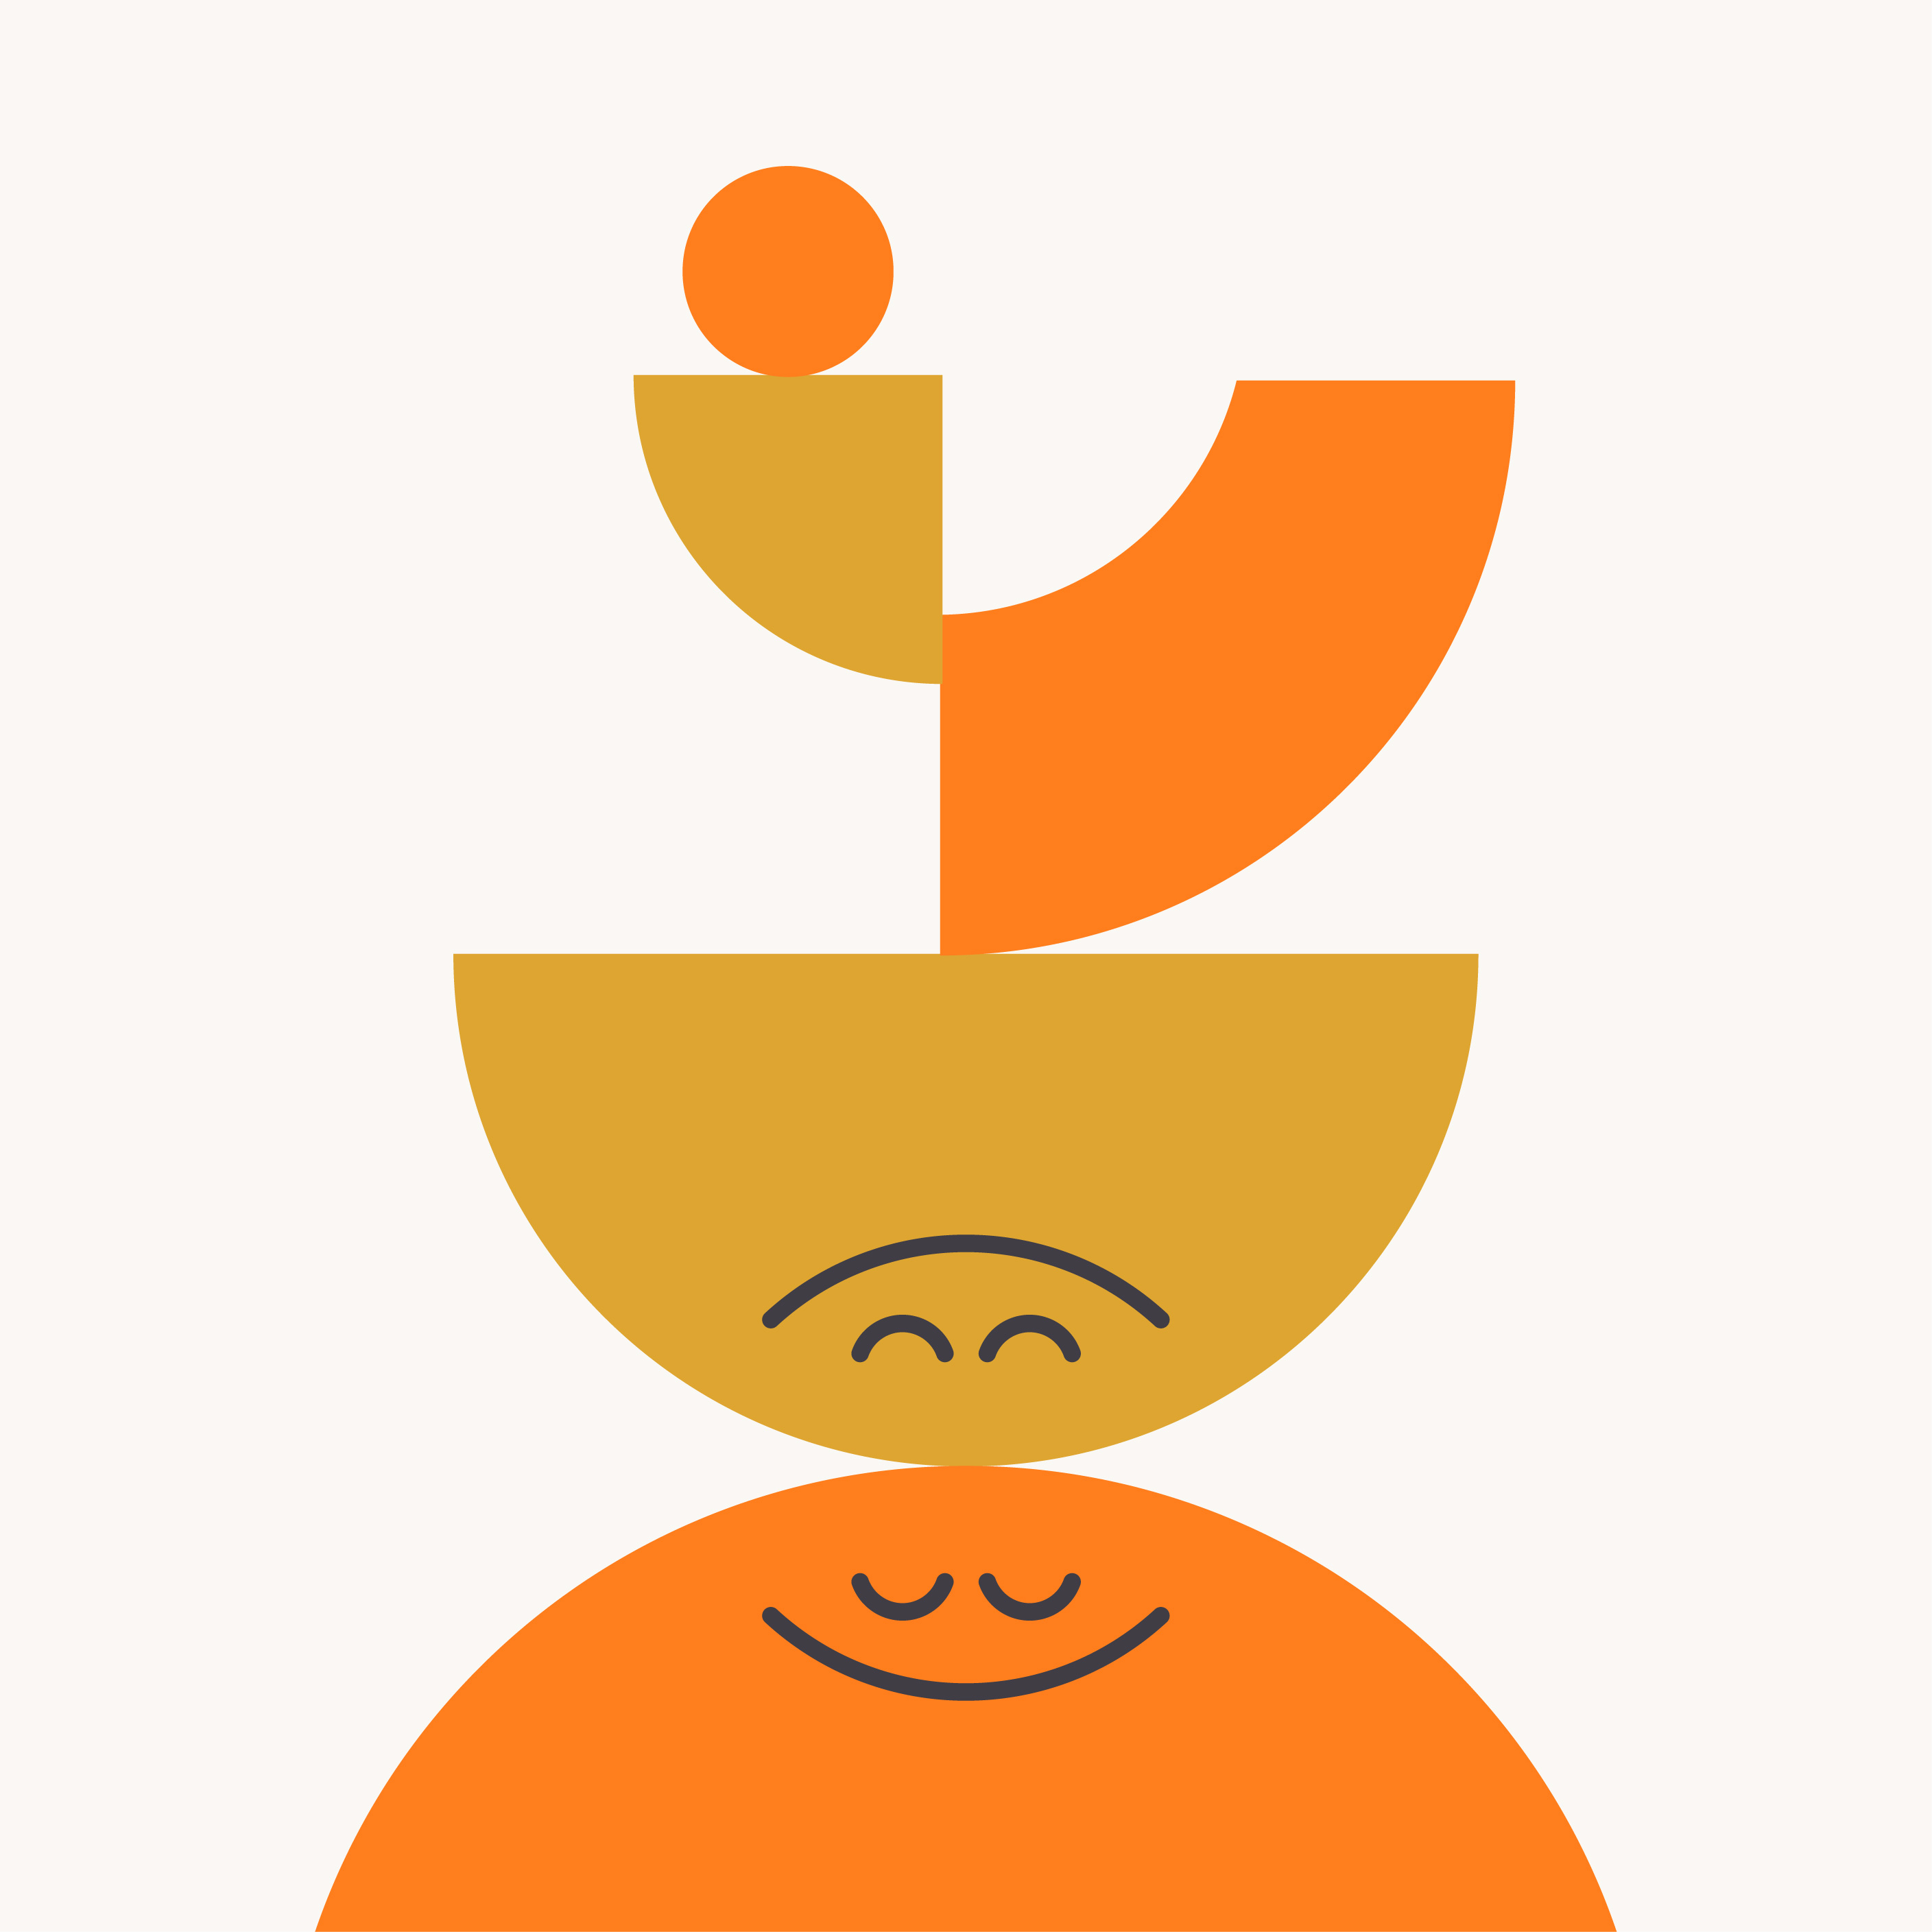 2022-04-15_Headspace Health_Promo Assets_676x676